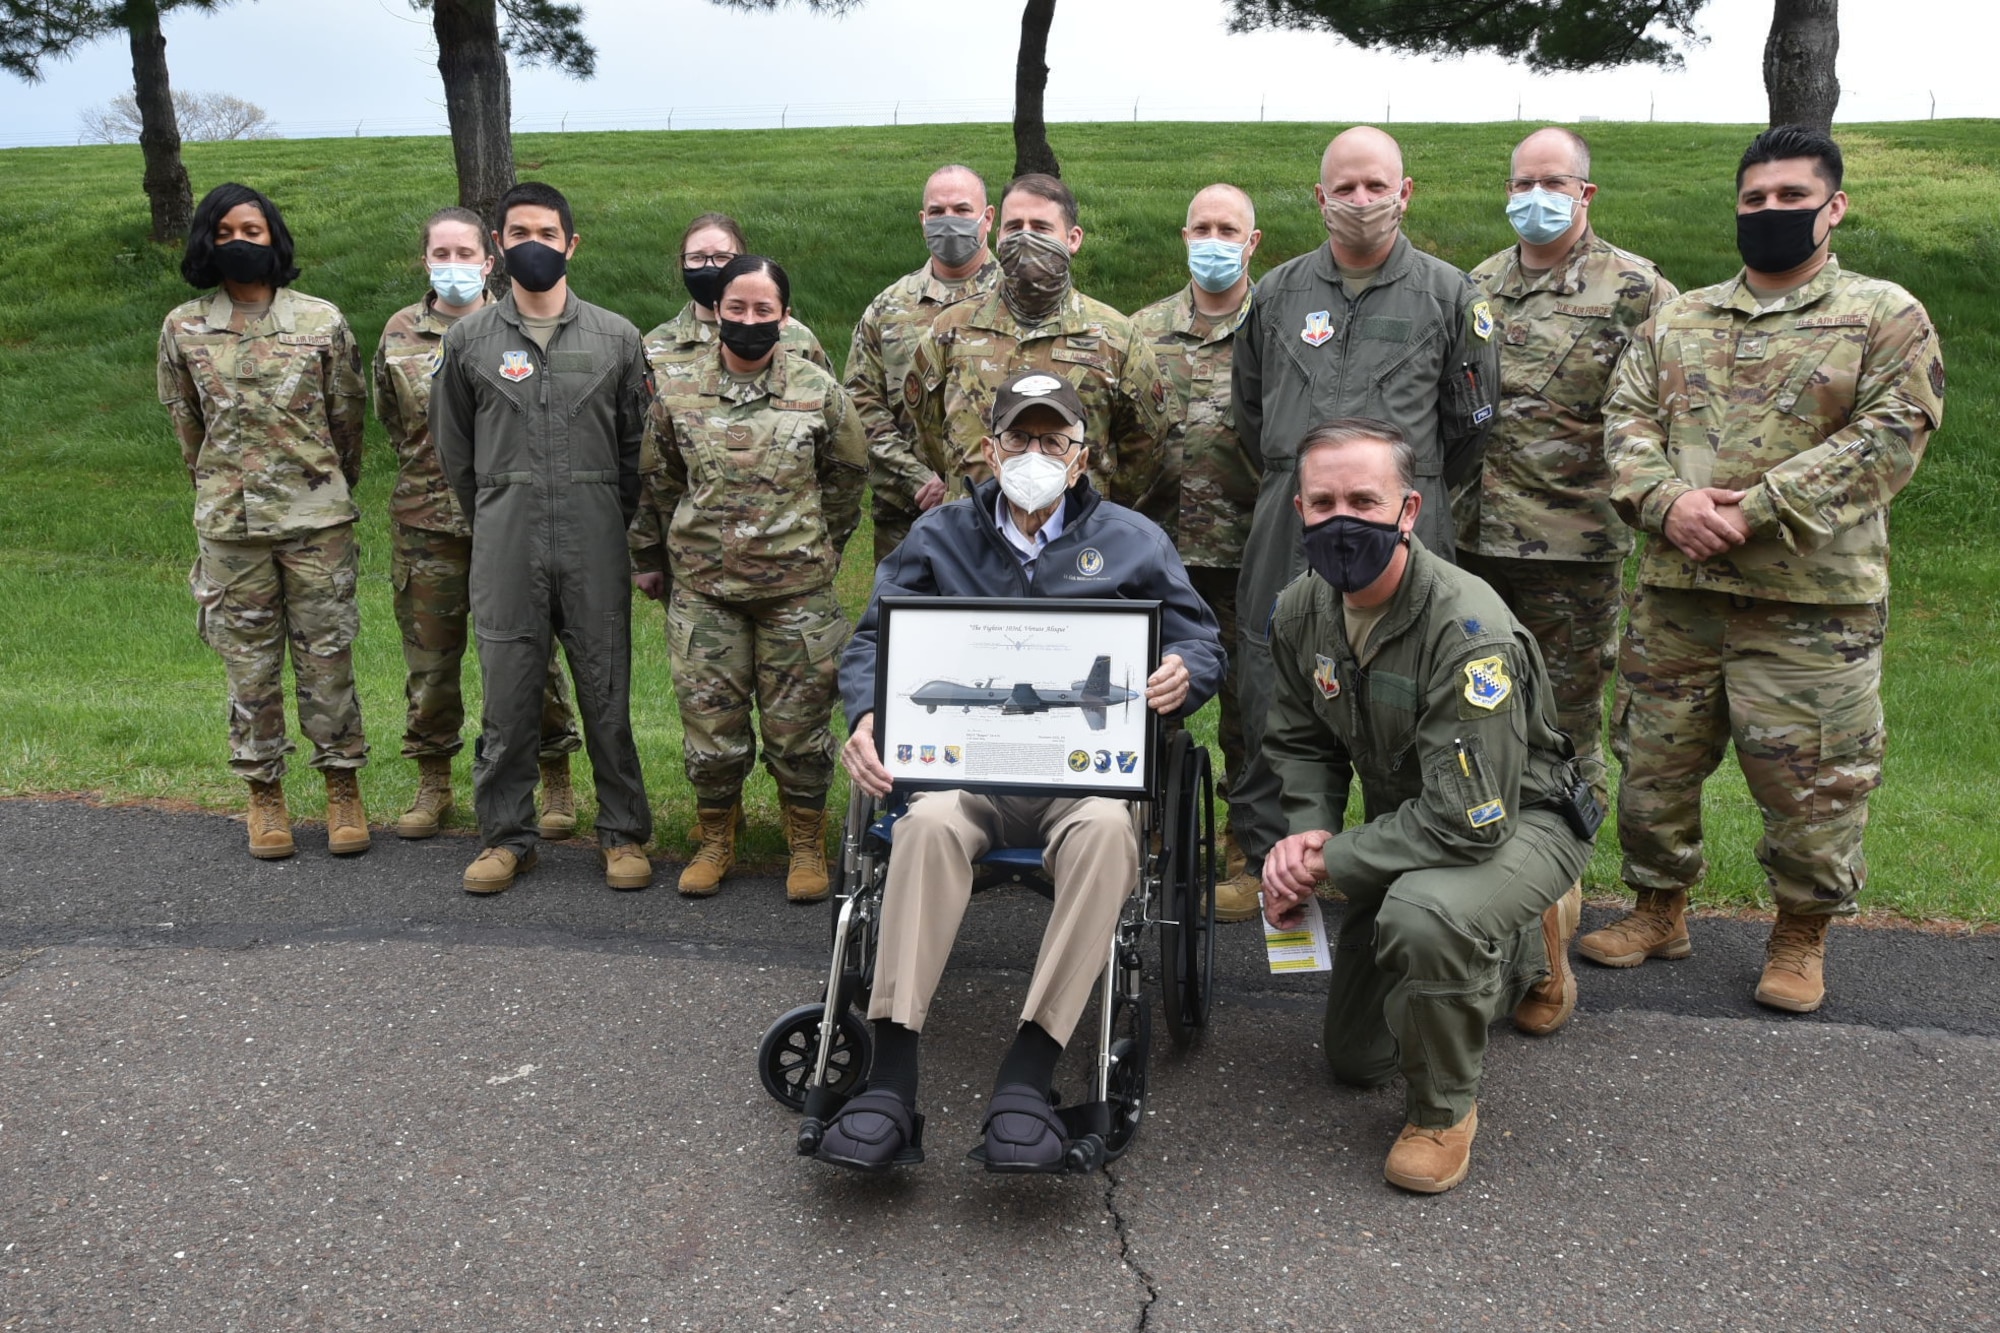 Air Force members pose for a photo with a World War II veteran sitting in a wheel chair holding a picture frame.